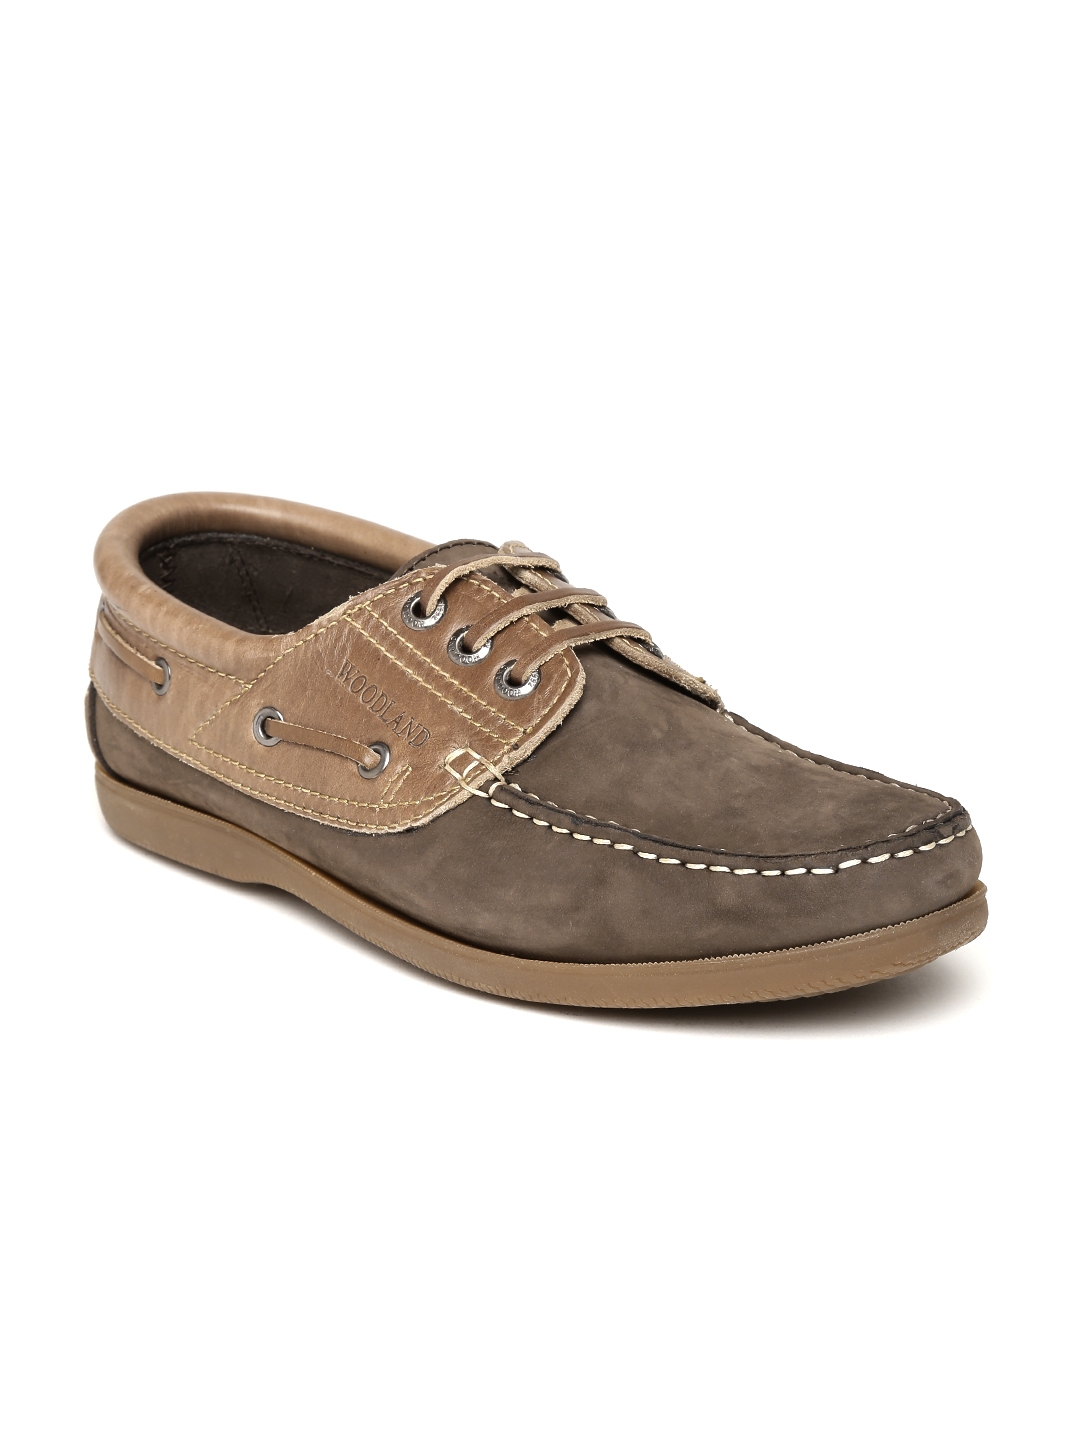 woodland men's leather boat shoes